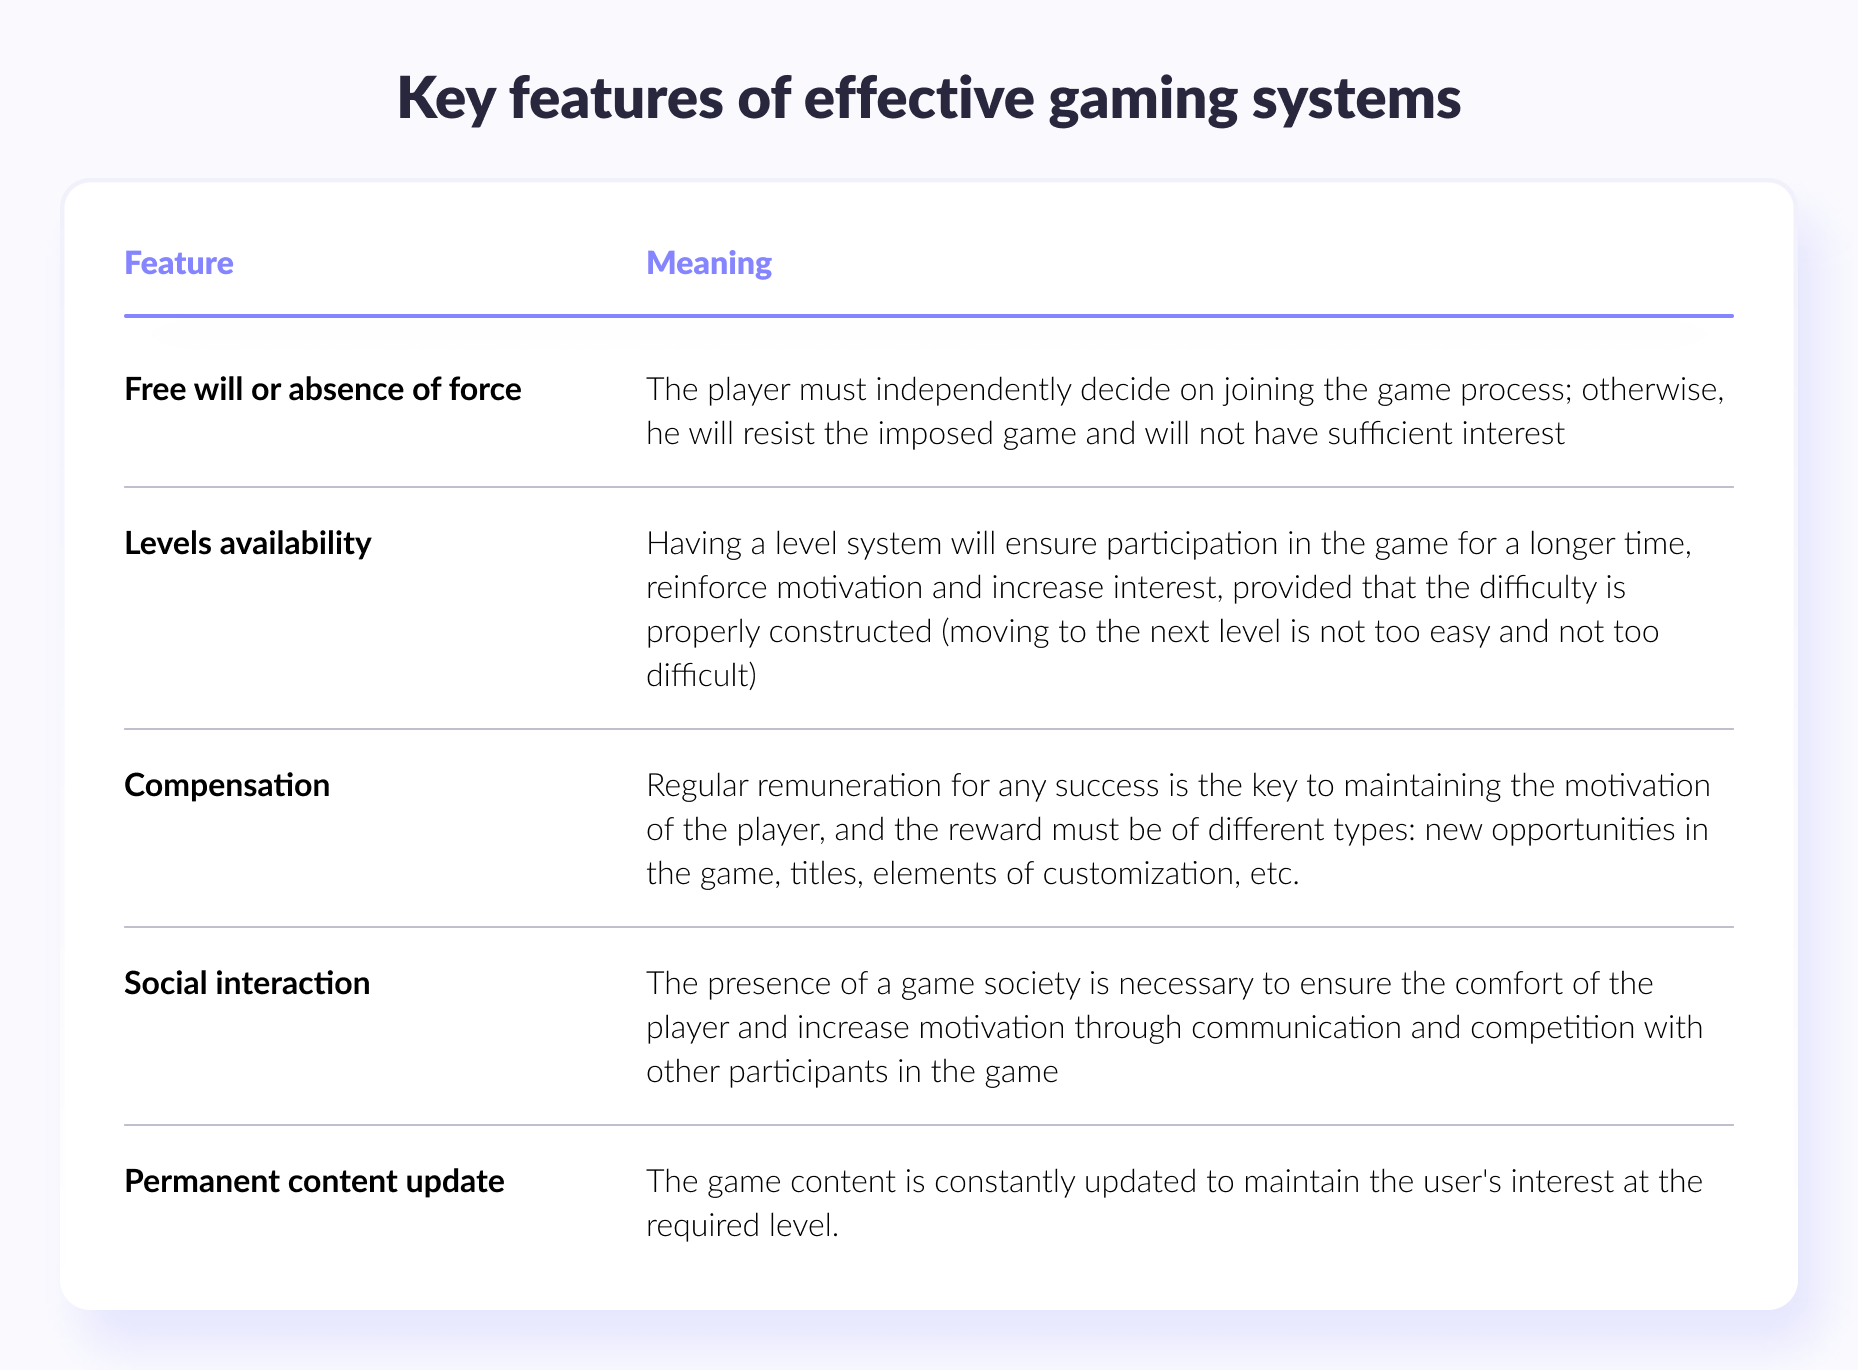 Key features of a good game system